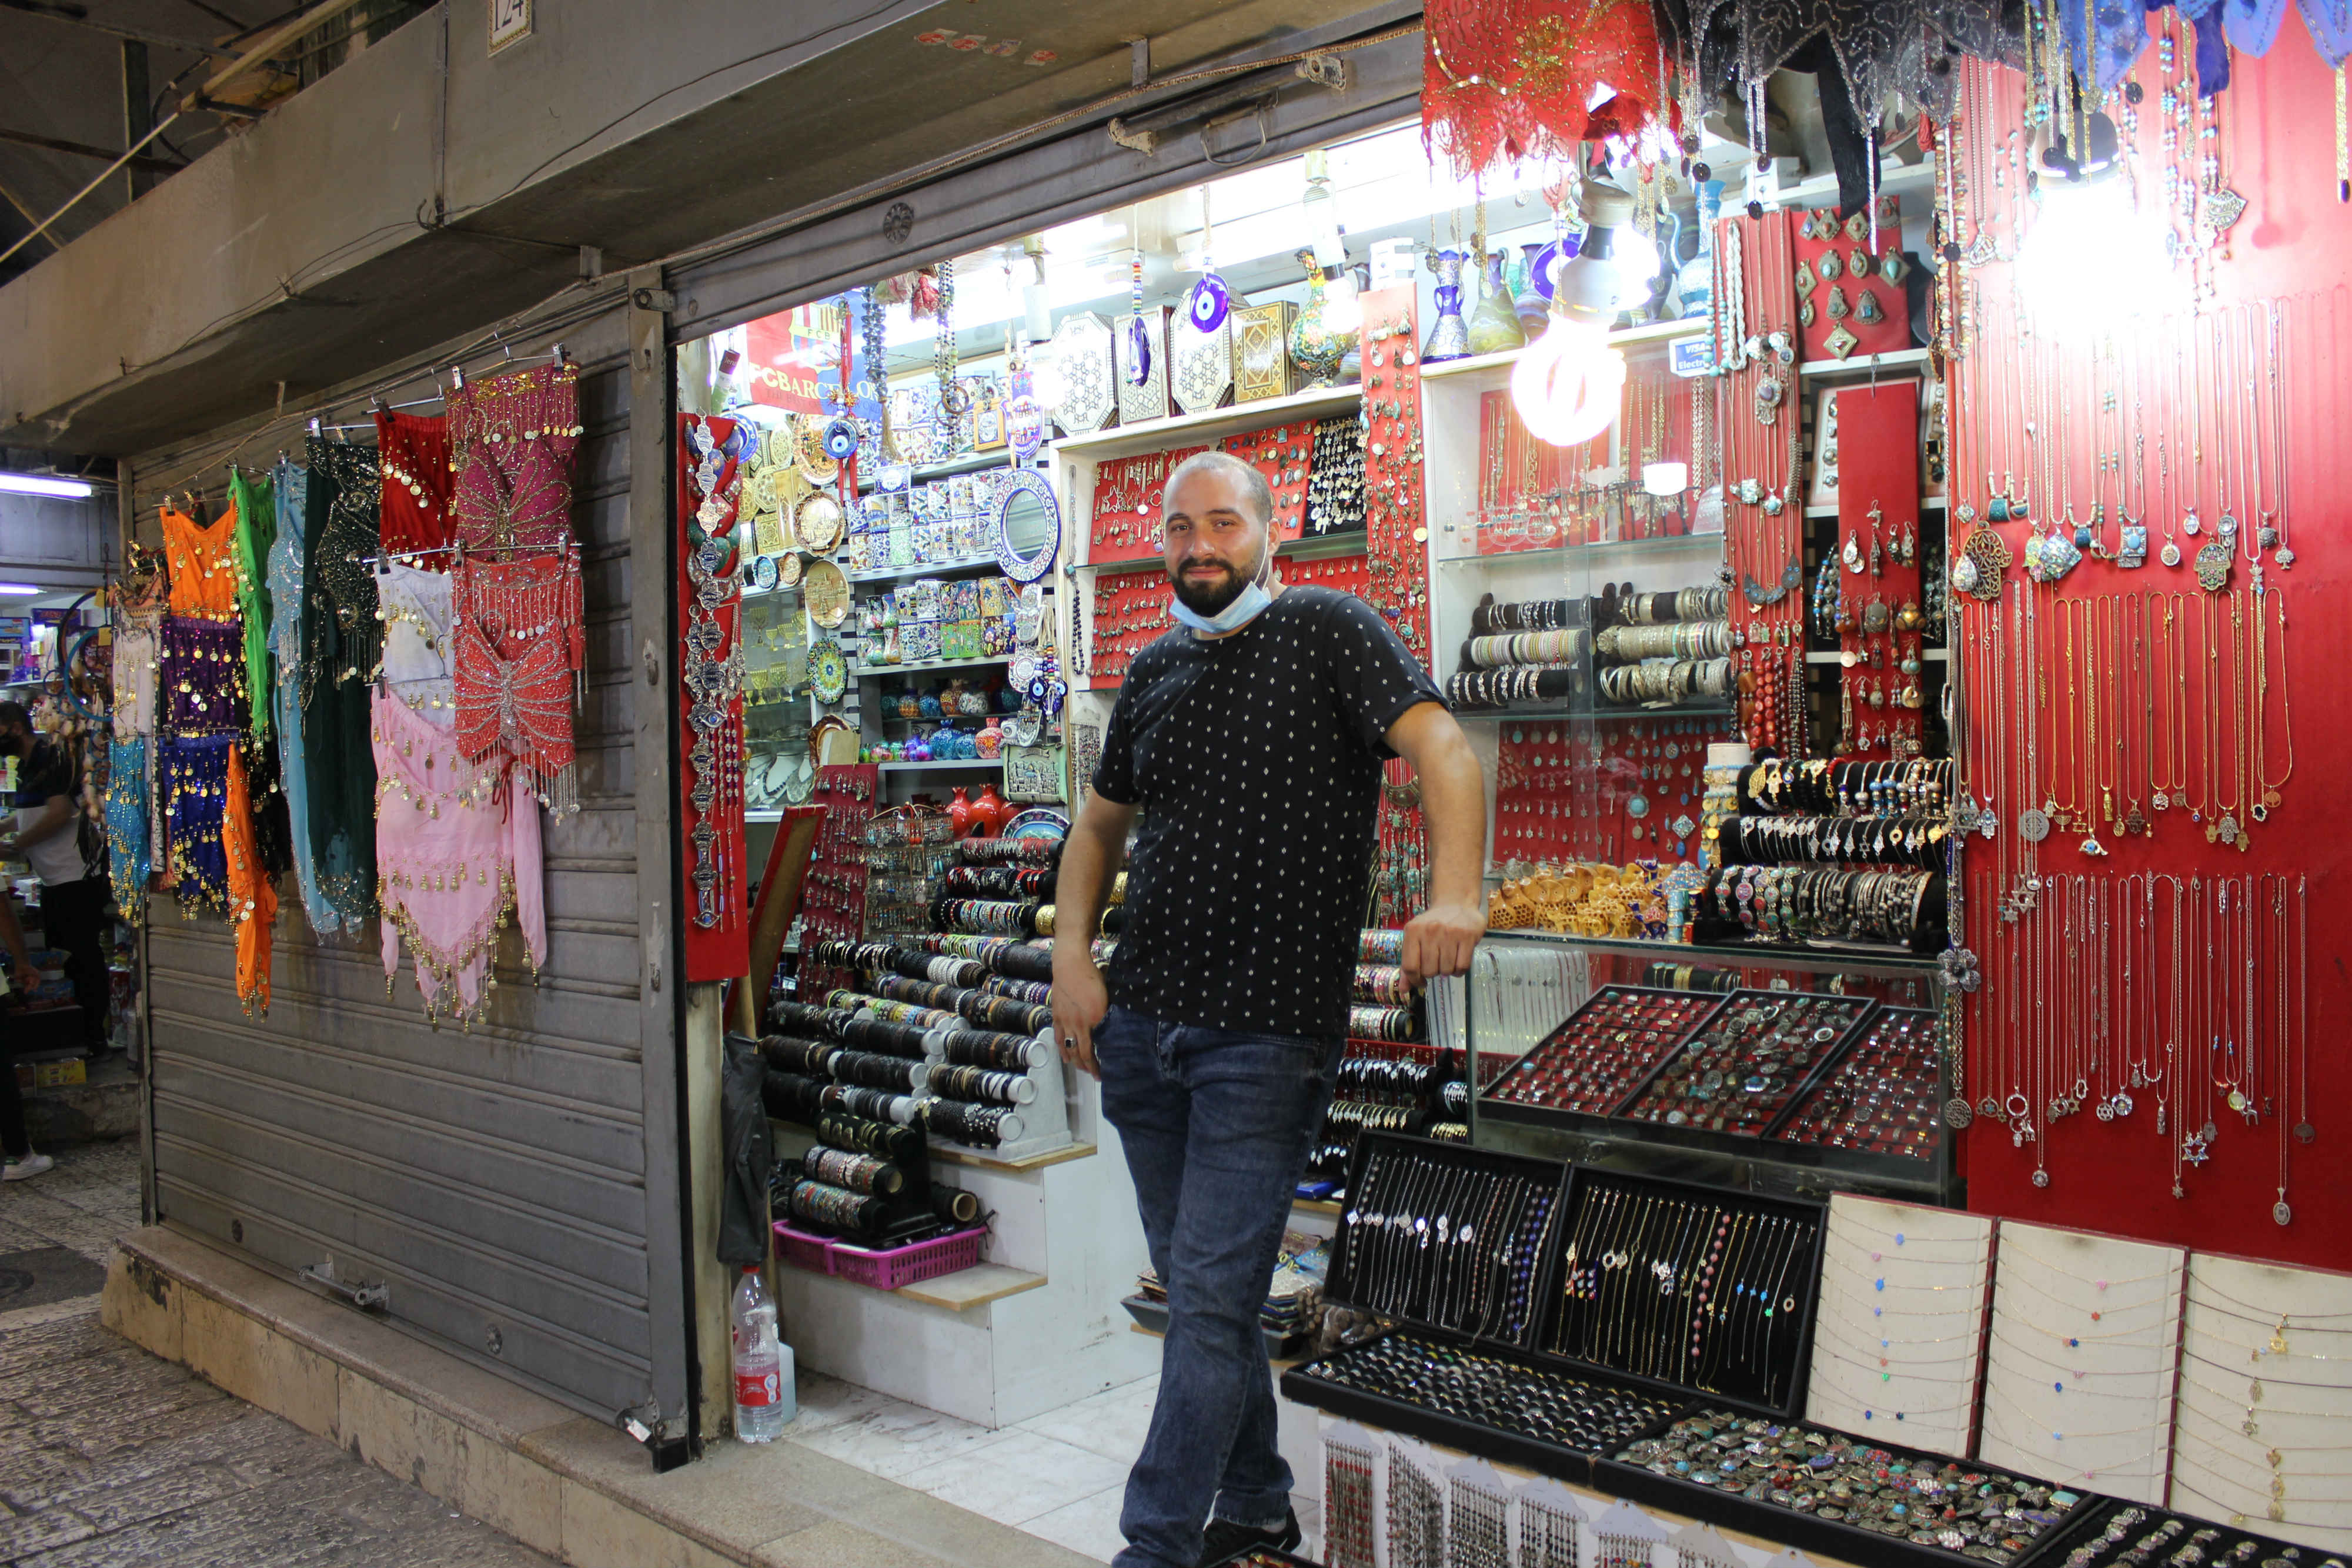 Abdeen is aware that he will not be able to sell anything because he relies mainly on tourists (MEE/Aseel Jundi)